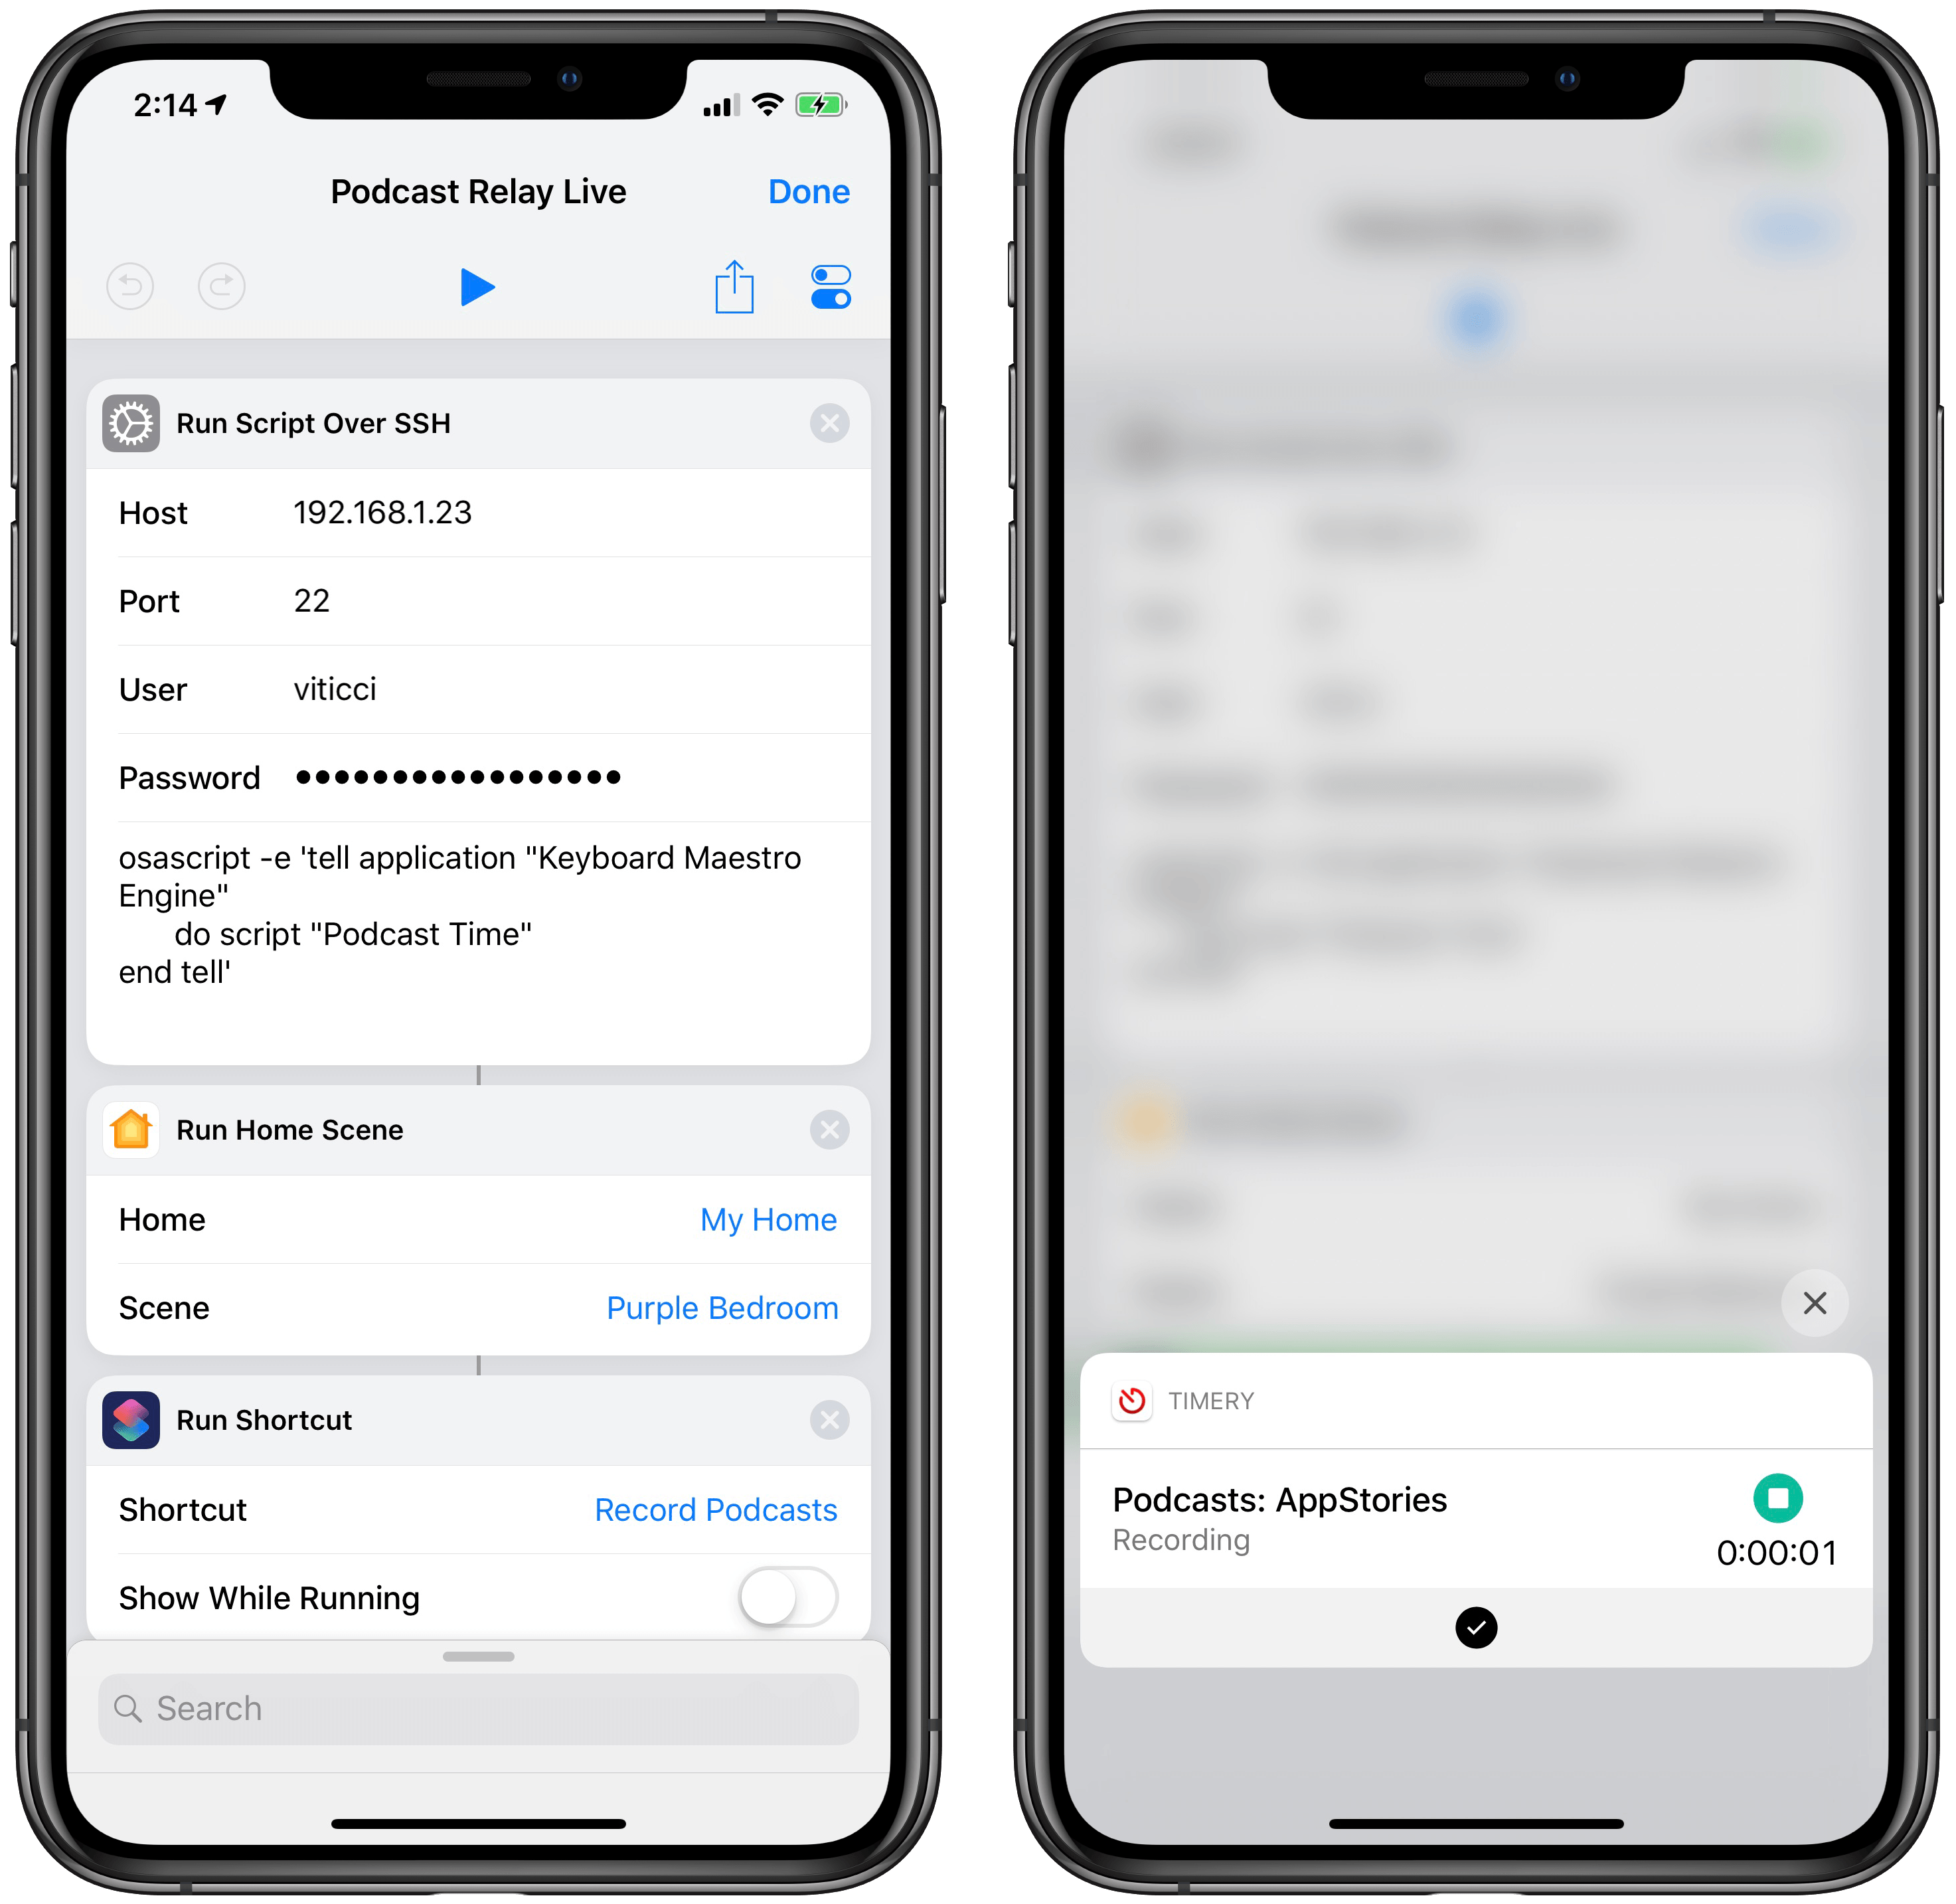 When I run the shortcut on my iPhone, nothing else is shown besides the Toggl shortcut started at the end.